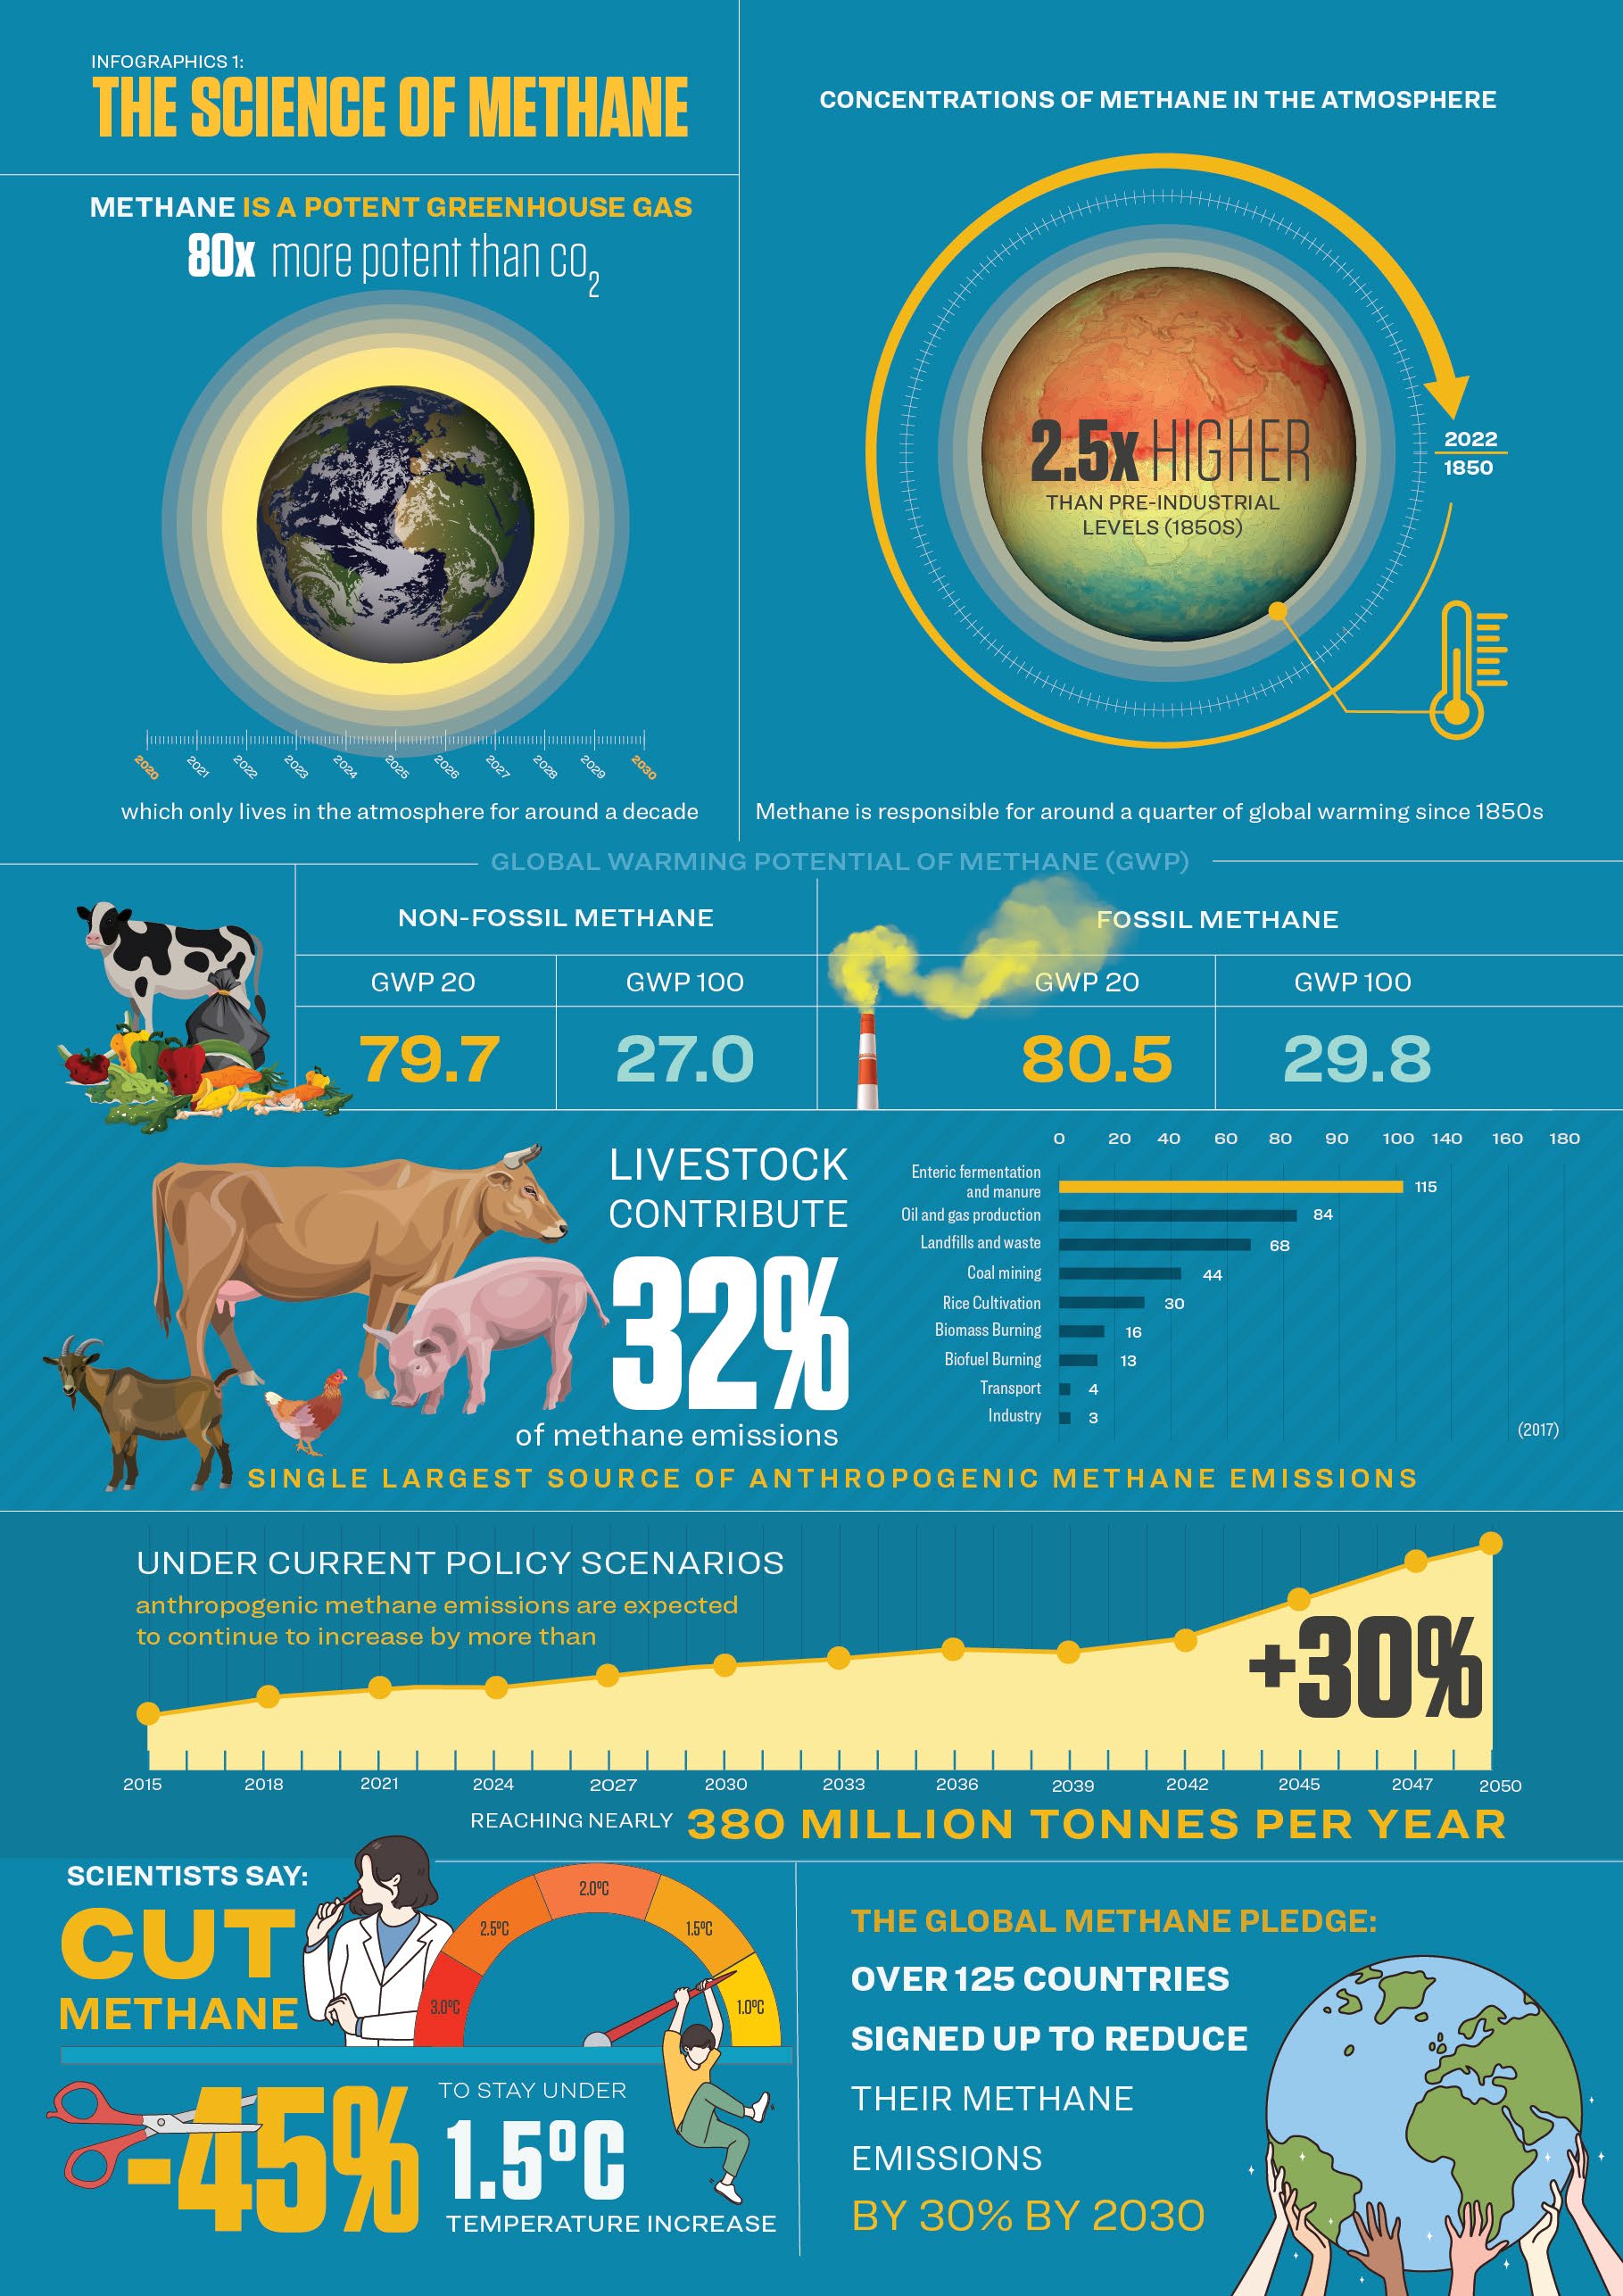 The Science of Methane infographic